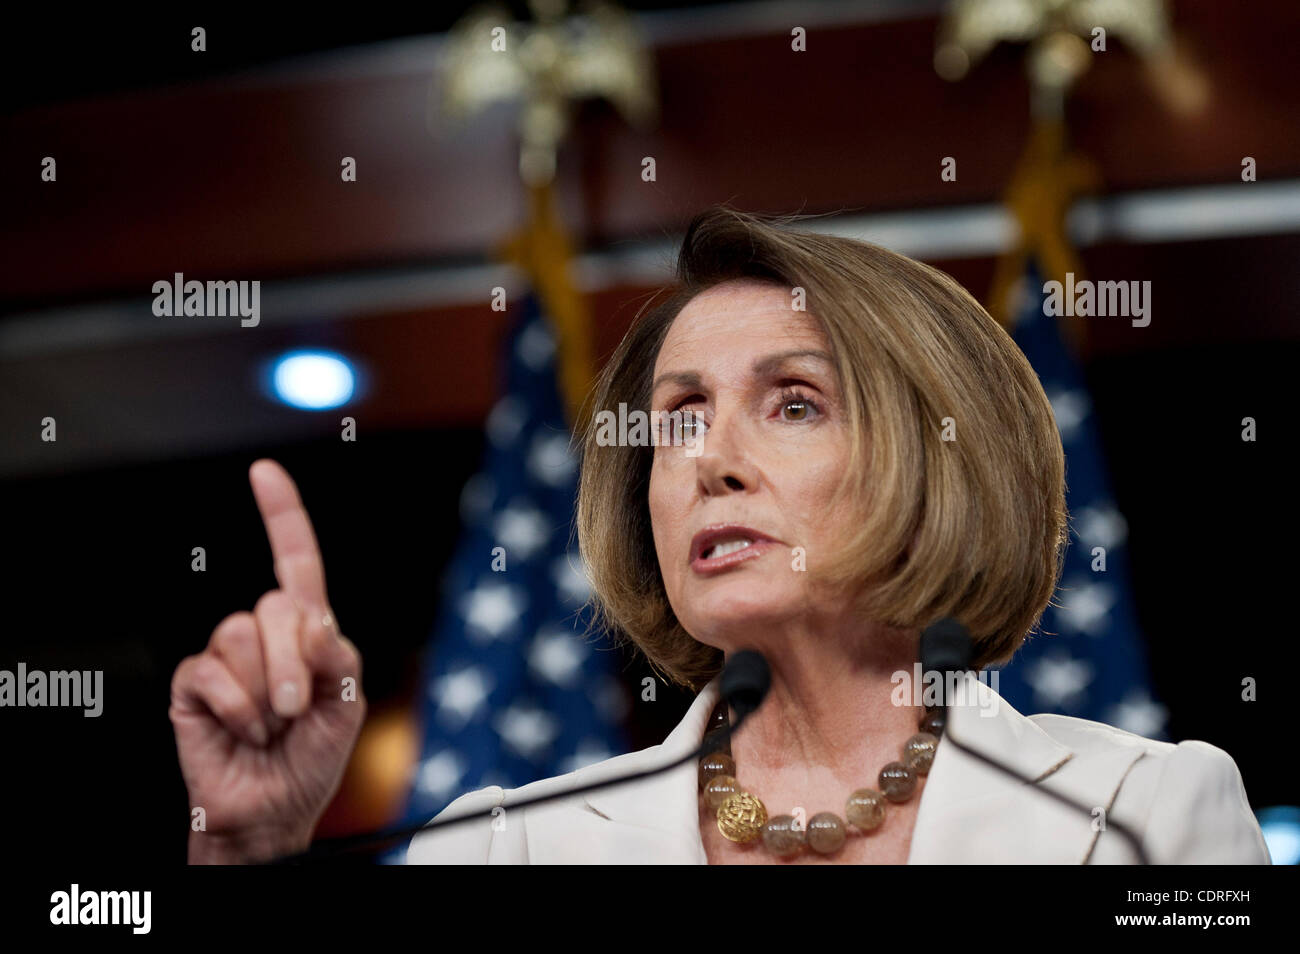 July 14, 2011 - Washington, District of Columbia, U.S. - House Minority Leader NANCY PELOSI (D-CA) speaks to the media about the ongoing budget talks during her weekly news conference at the Capitol on Thursday. (Credit Image: © Pete Marovich/ZUMAPRESS.com) Stock Photo